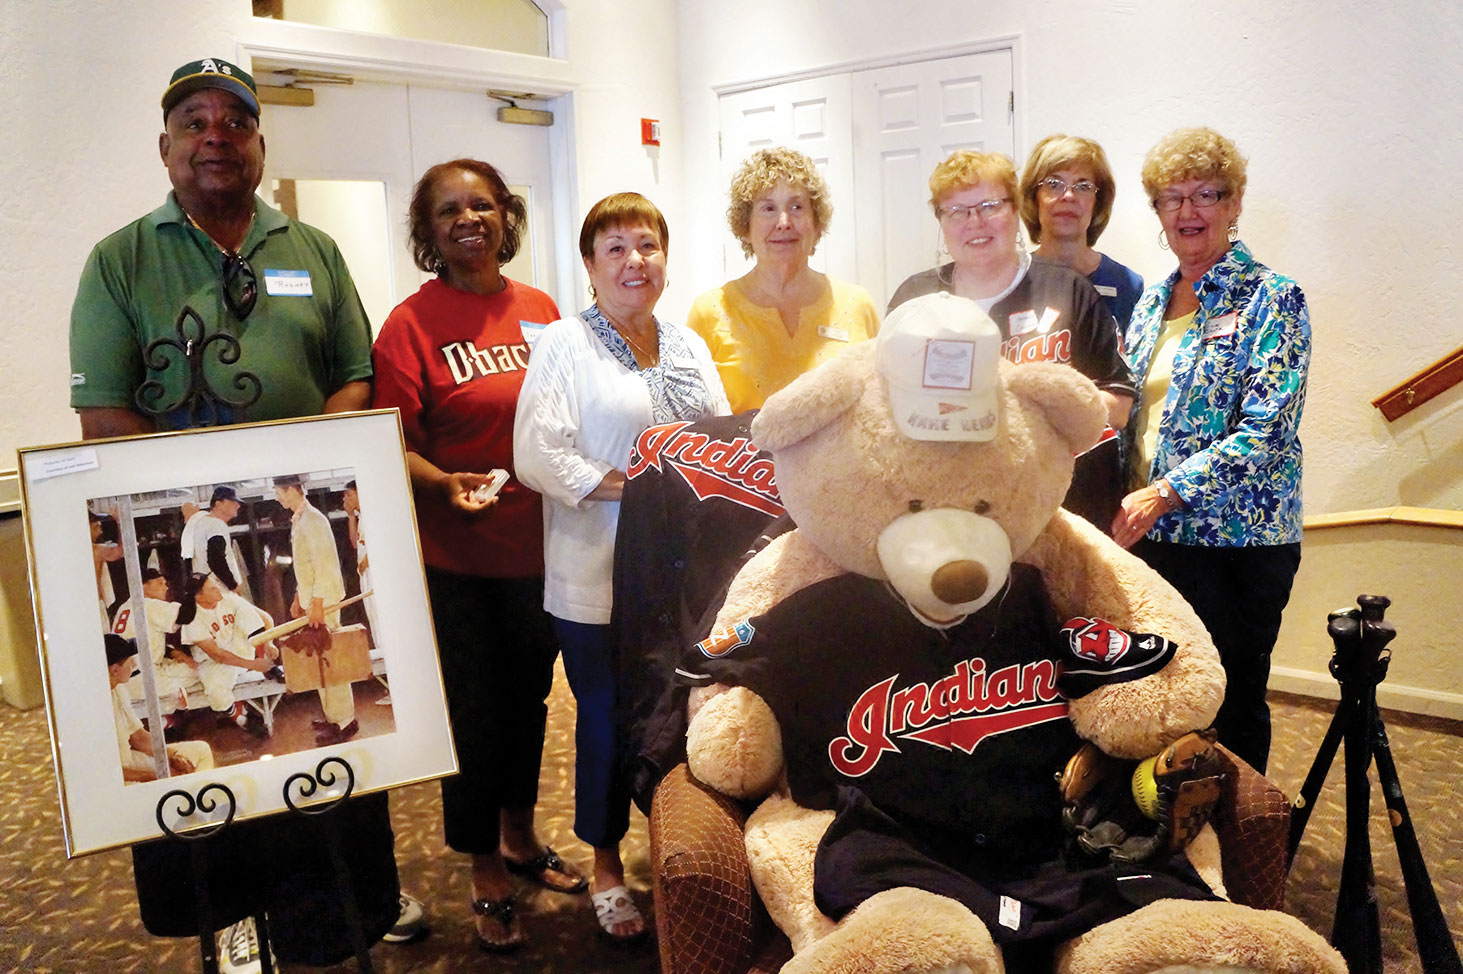 From left: Kare Bears volunteers who received 10 year pins at the Spring Fling volunteer event: Rod Suttles, Carolyn Suttles, Ellen Stergulz, Patti Hodge, Grace Cooper, Jackie Belonax and Sue Chute